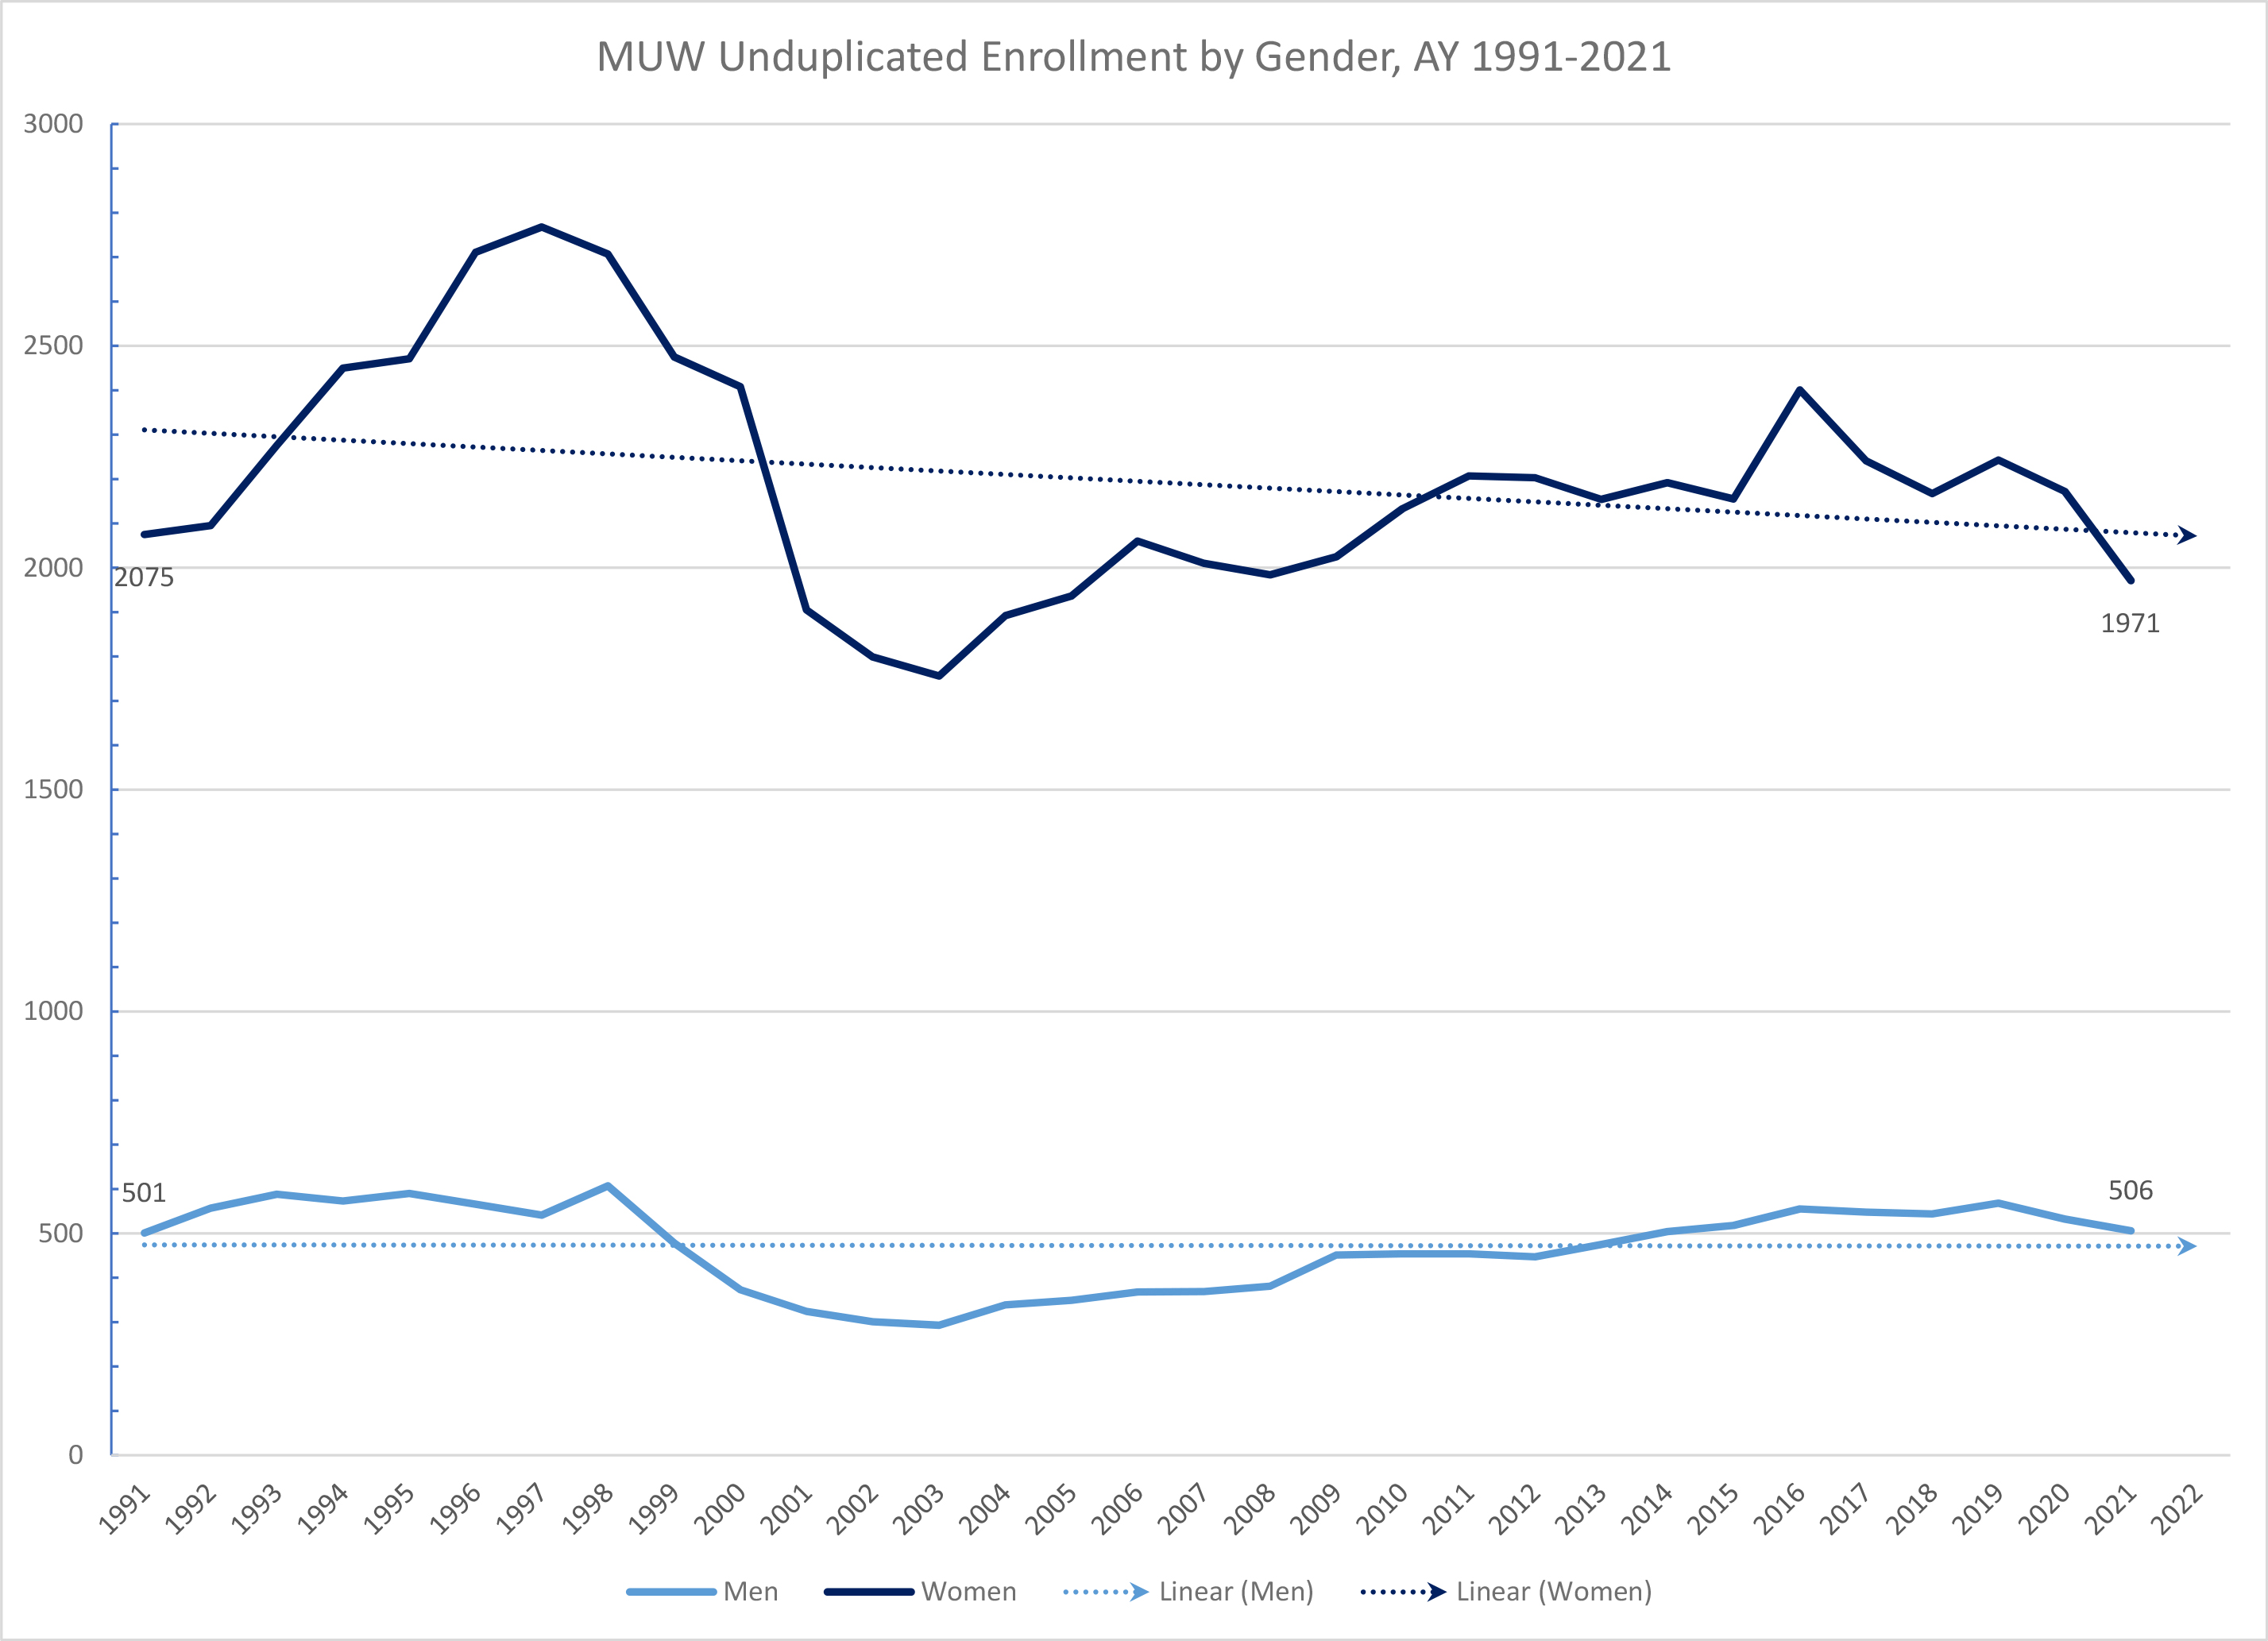 Chart: Unduplicated Headcount by Gender 1991 to 2021 shows declining female enrollment and flat male enrollment over 30 years.